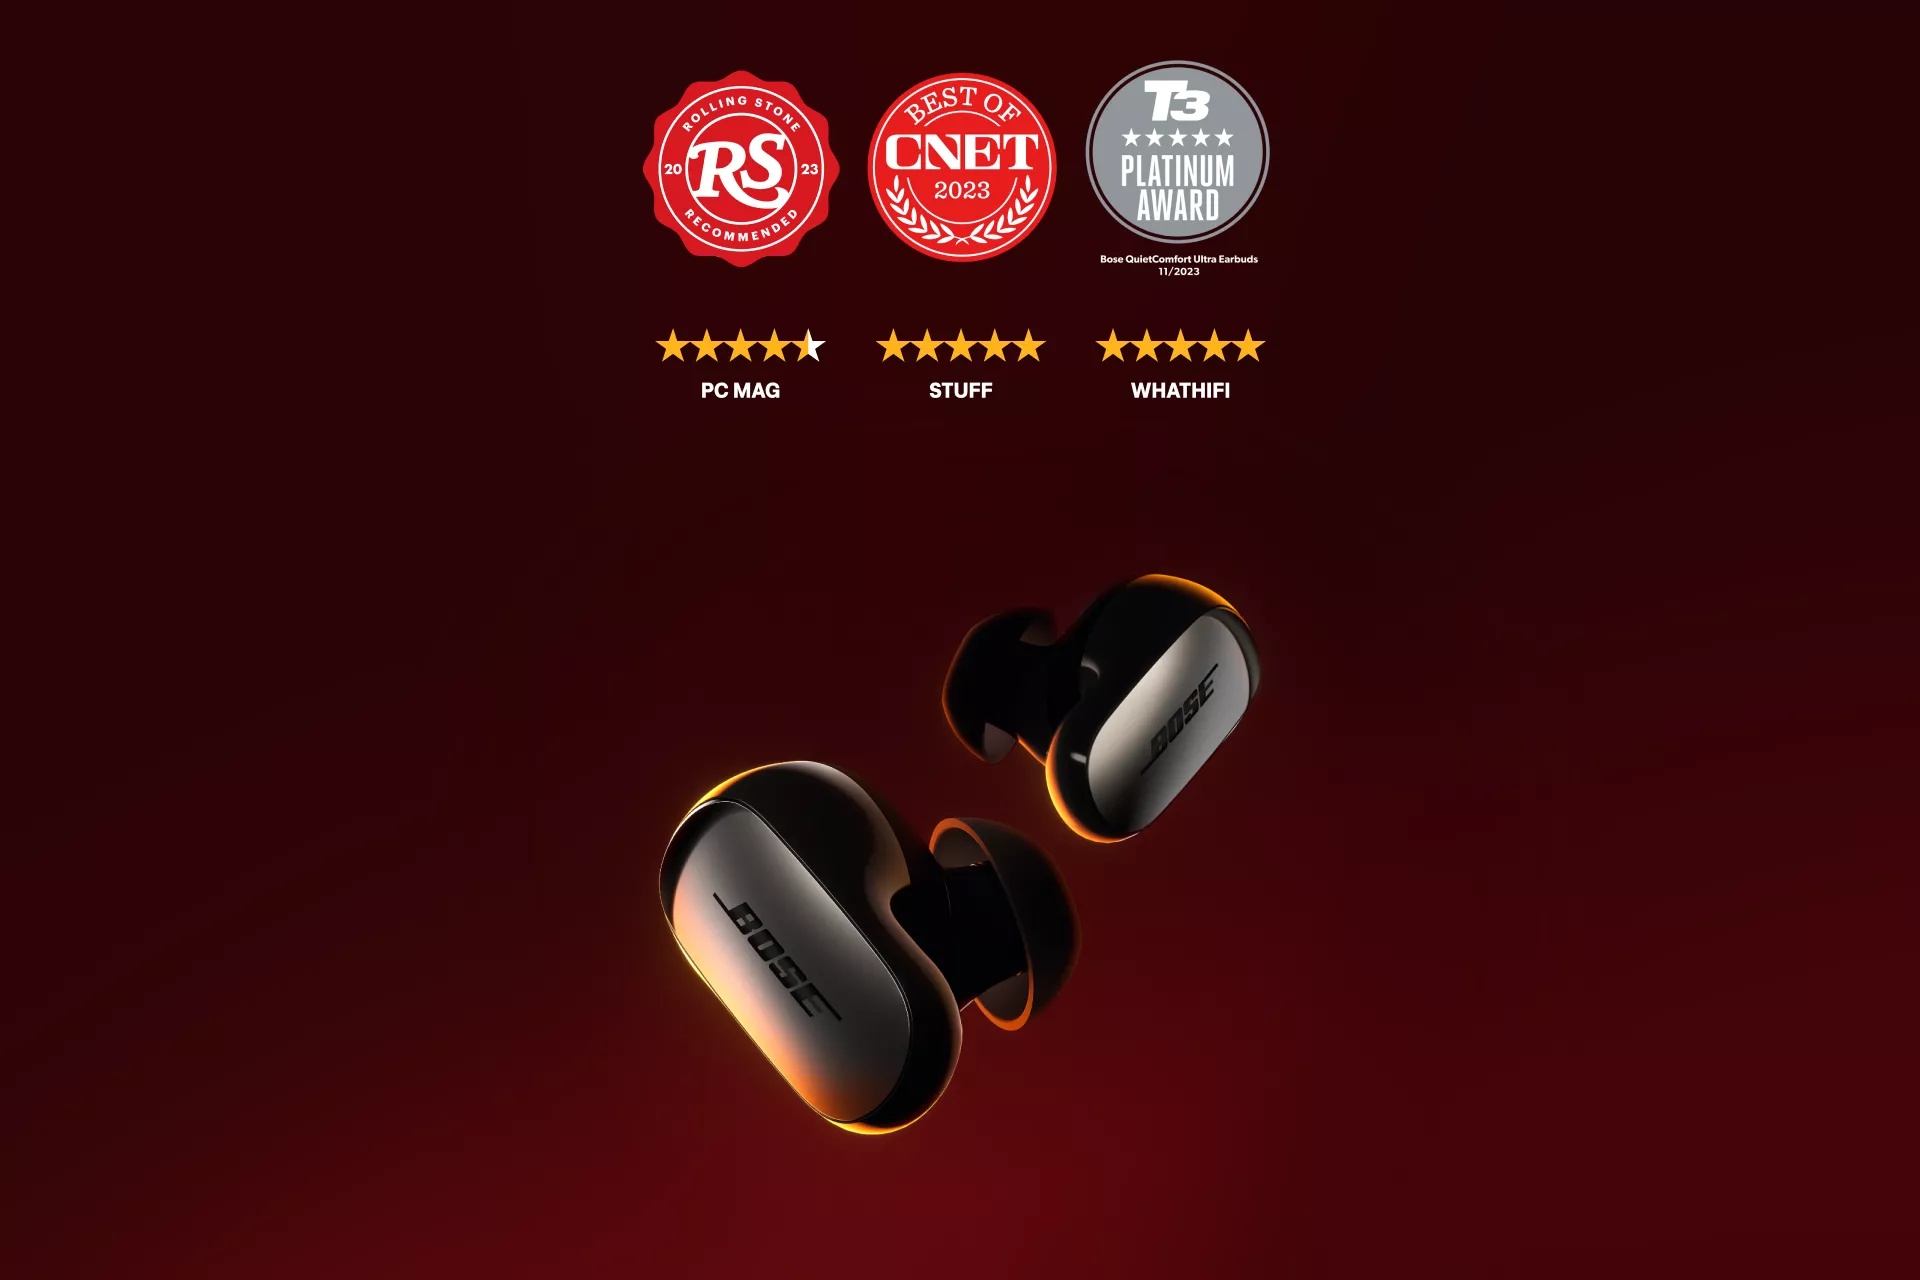 Badge Rolling Stone Recommended 2023, badge CNET Best of 2023, badge 5 étoiles Platinum Award 11/2023 de T3, note PC Mag 4,5/5 étoiles, note Stuff 5/5 étoiles, note What HiFi 5/5 étoiles, note Engadget 88/100